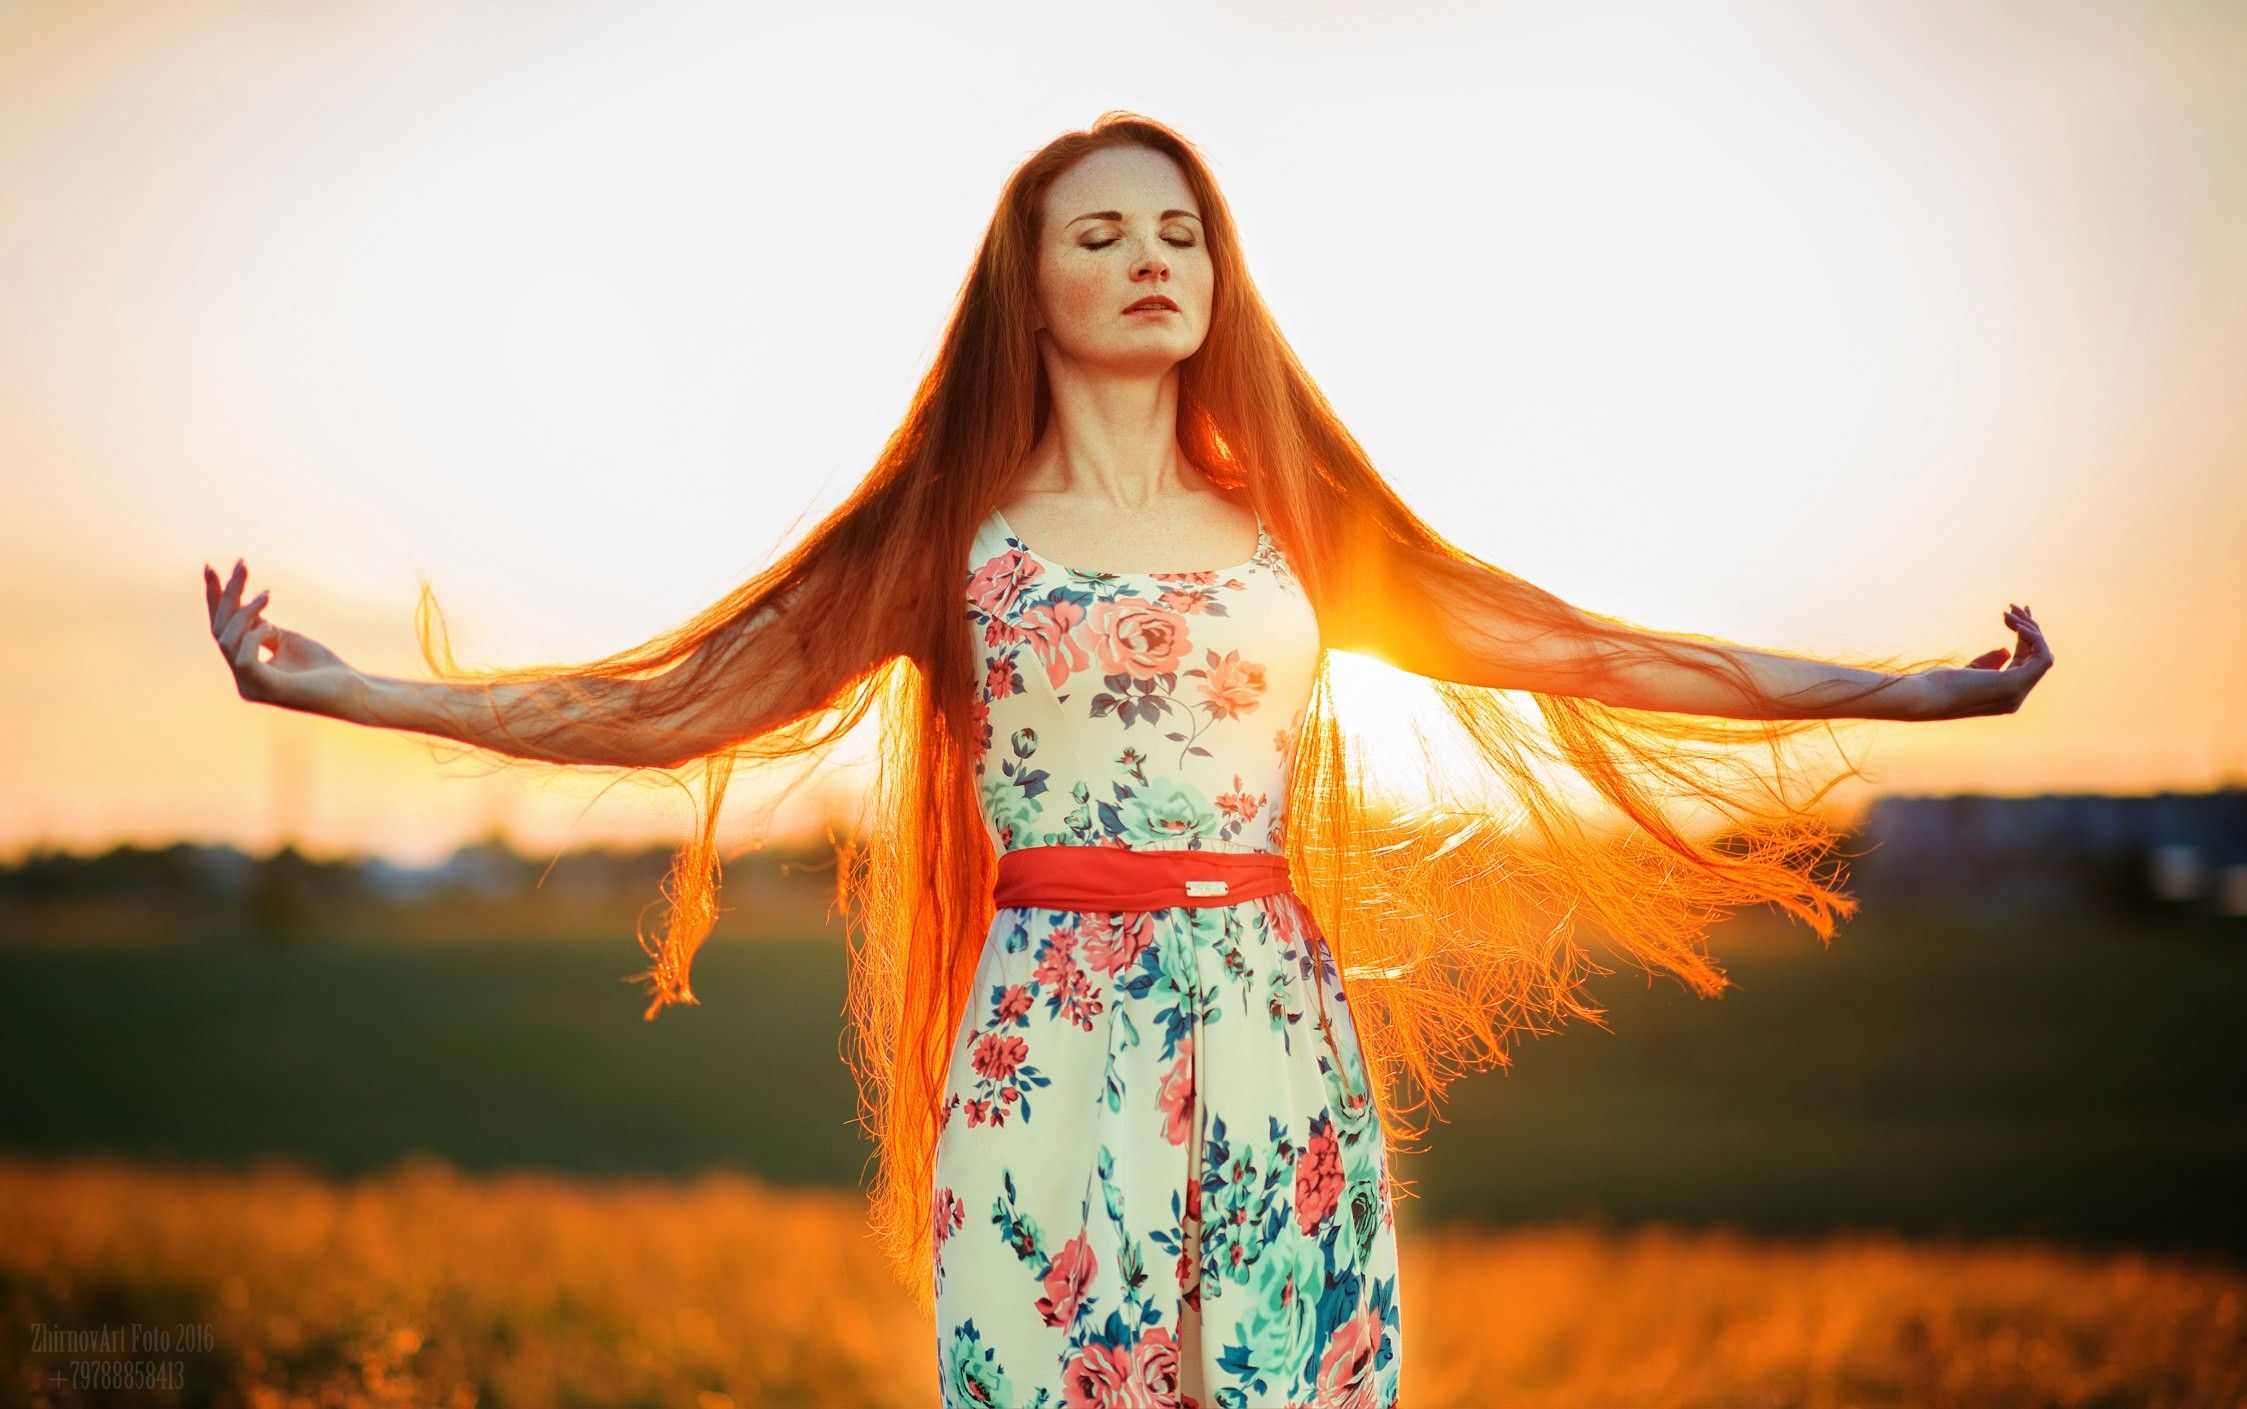 Wallpaper, women outdoors, redhead, model, long hair, closed eyes, red, photography, freckles, fashion, summer dress, spring, clothing, Ilya Zhirnov, color, flower, girl, beauty, woman, lady, fun, costume, photo shoot 2247x1409